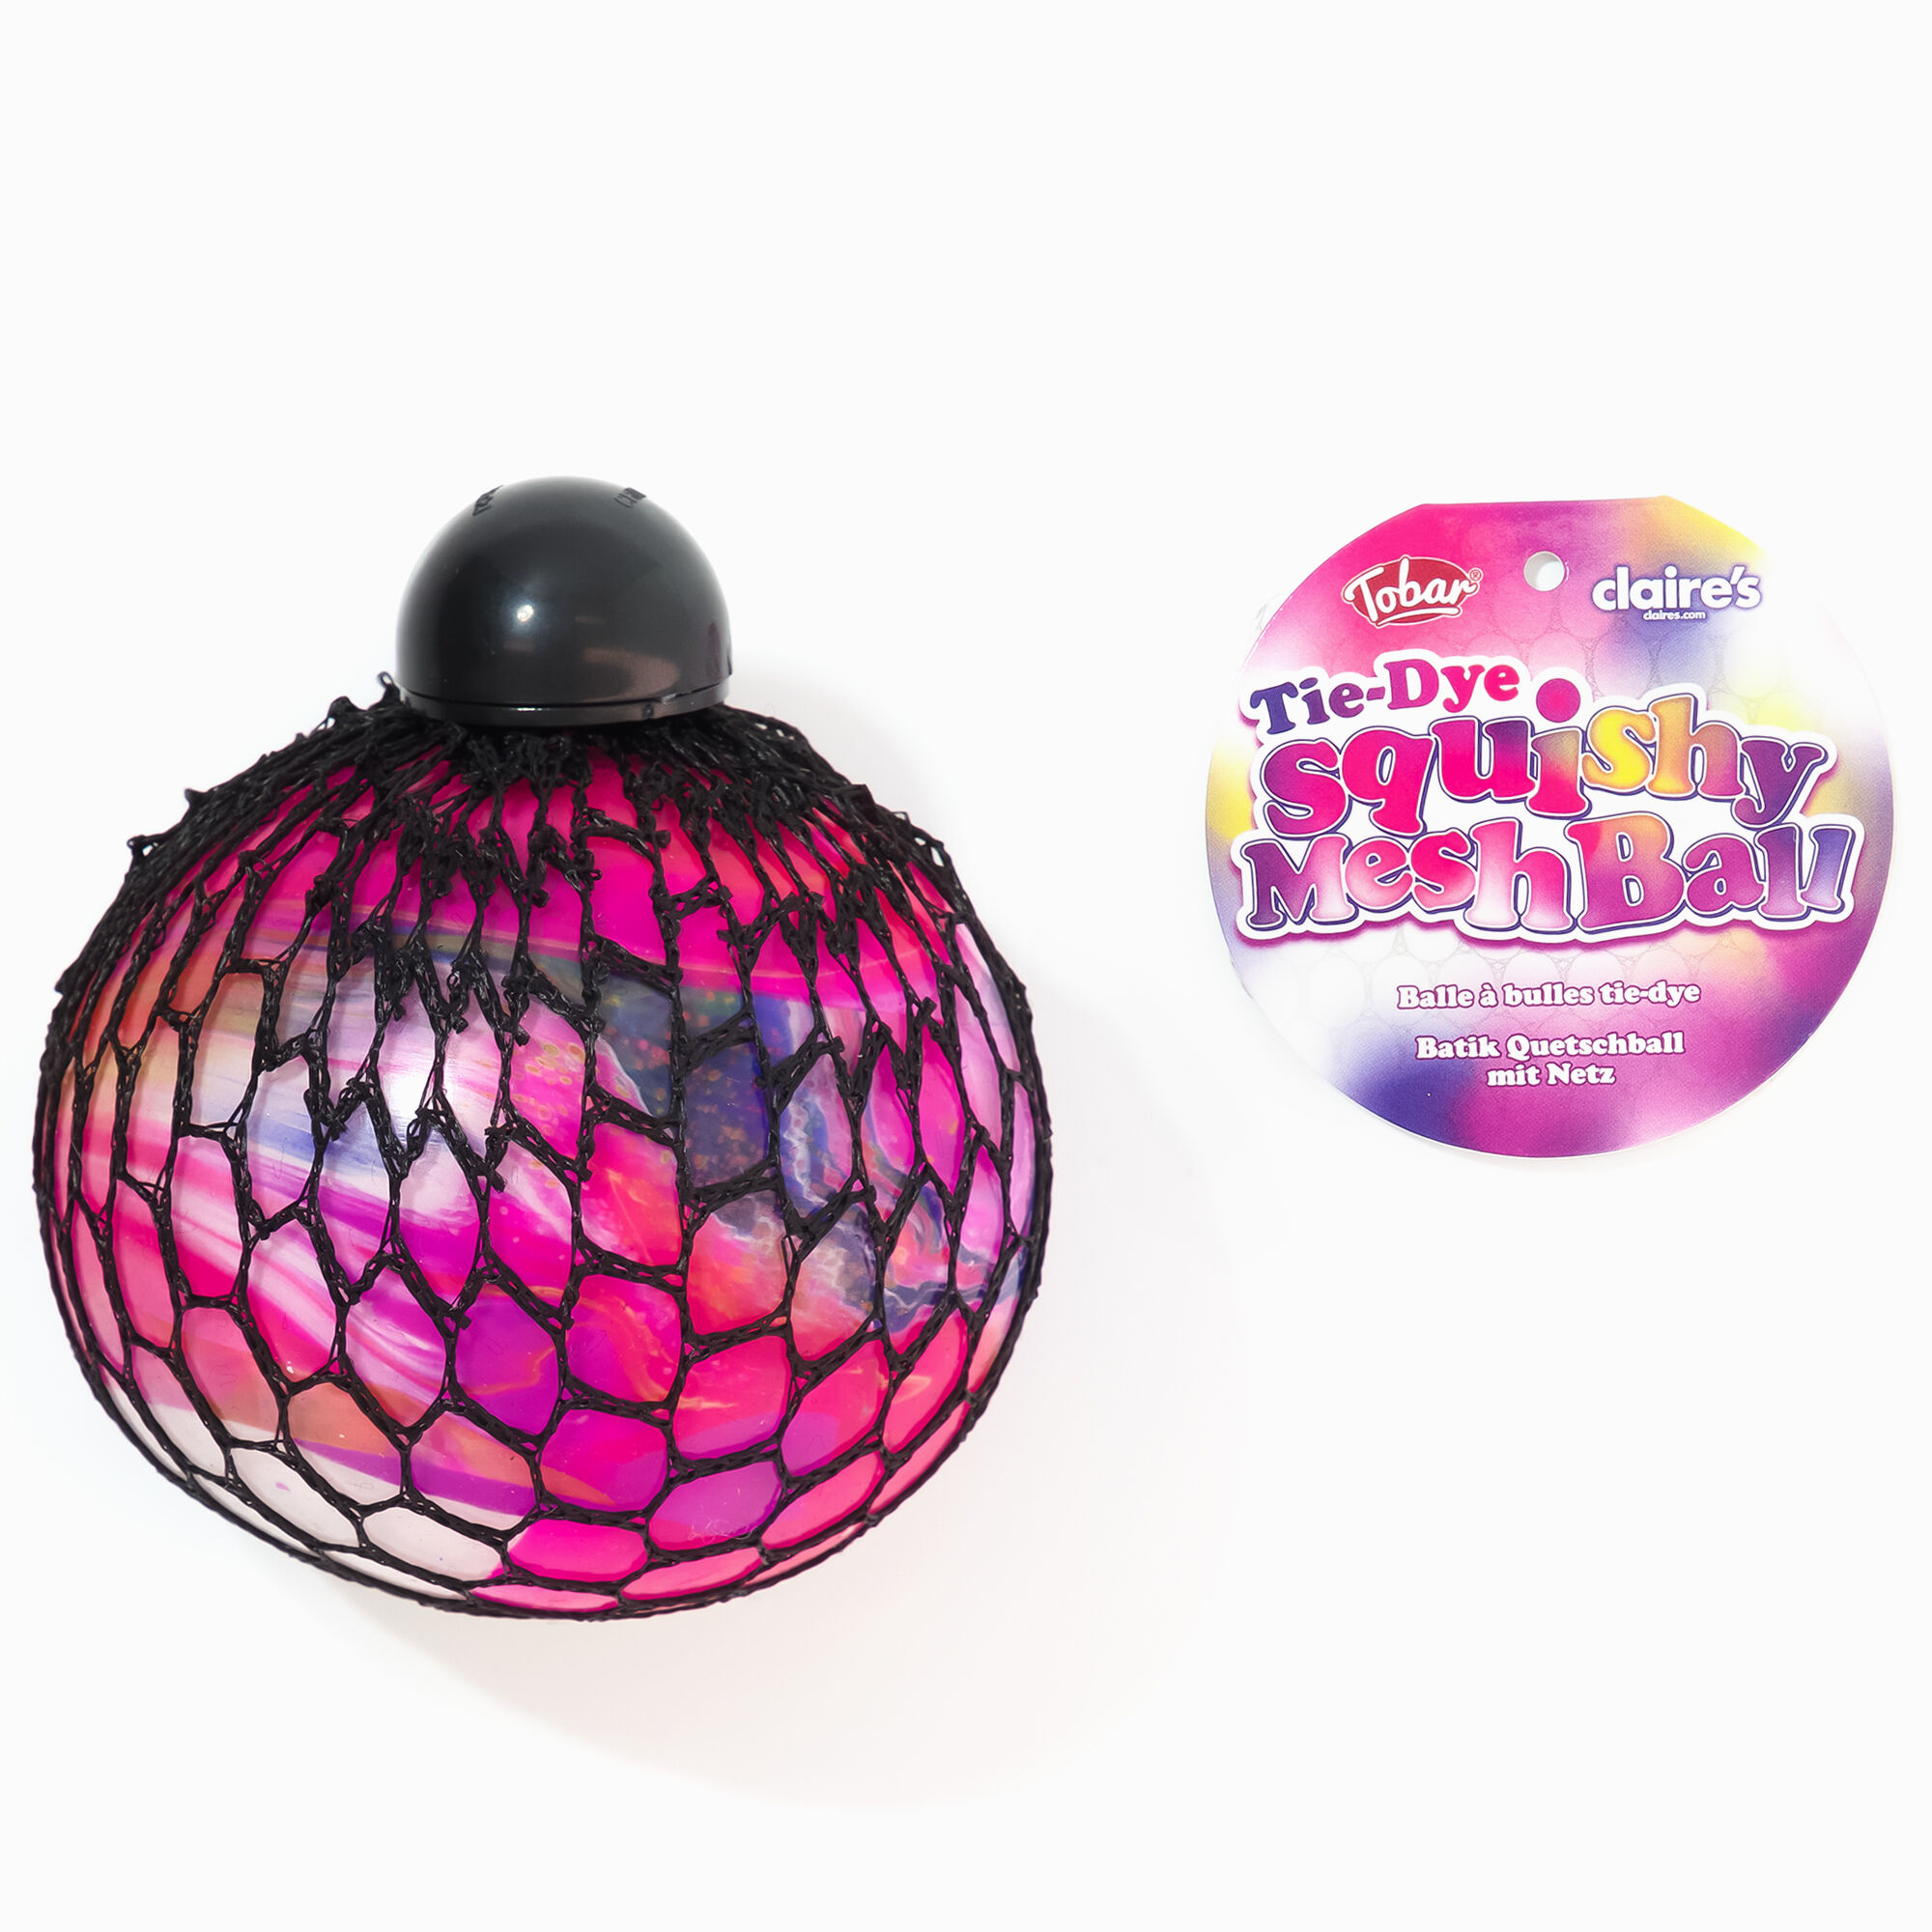 View Claires TieDye Squishy Mesh Ball Fidget Toy information